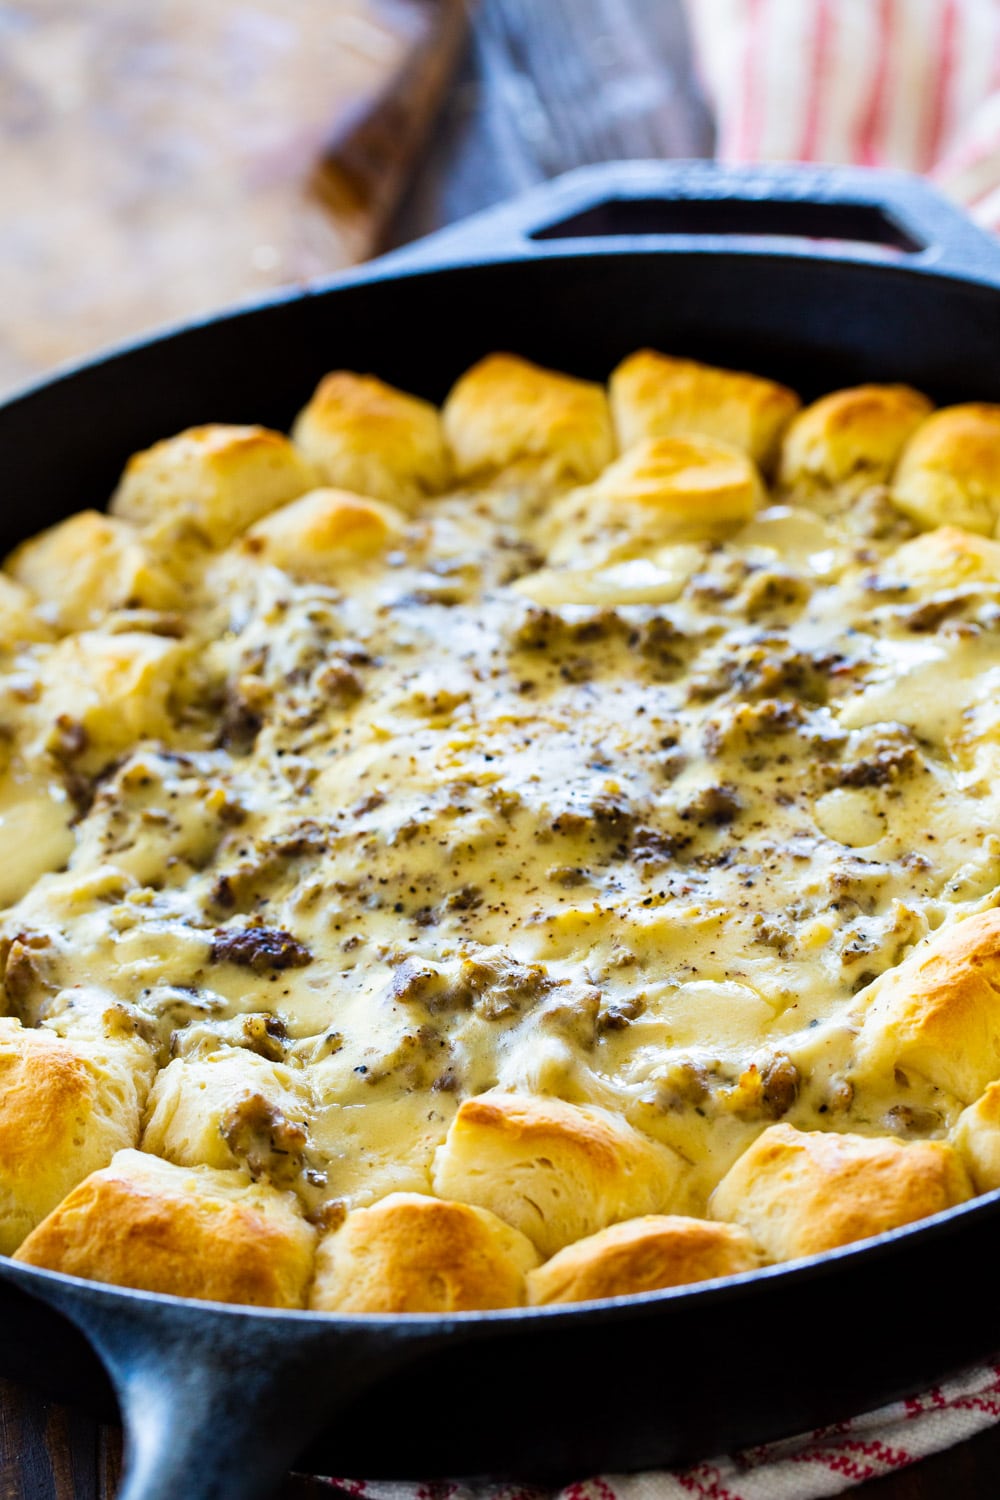 Sausage gravy surrounded by biscuits in a cast iron pan.